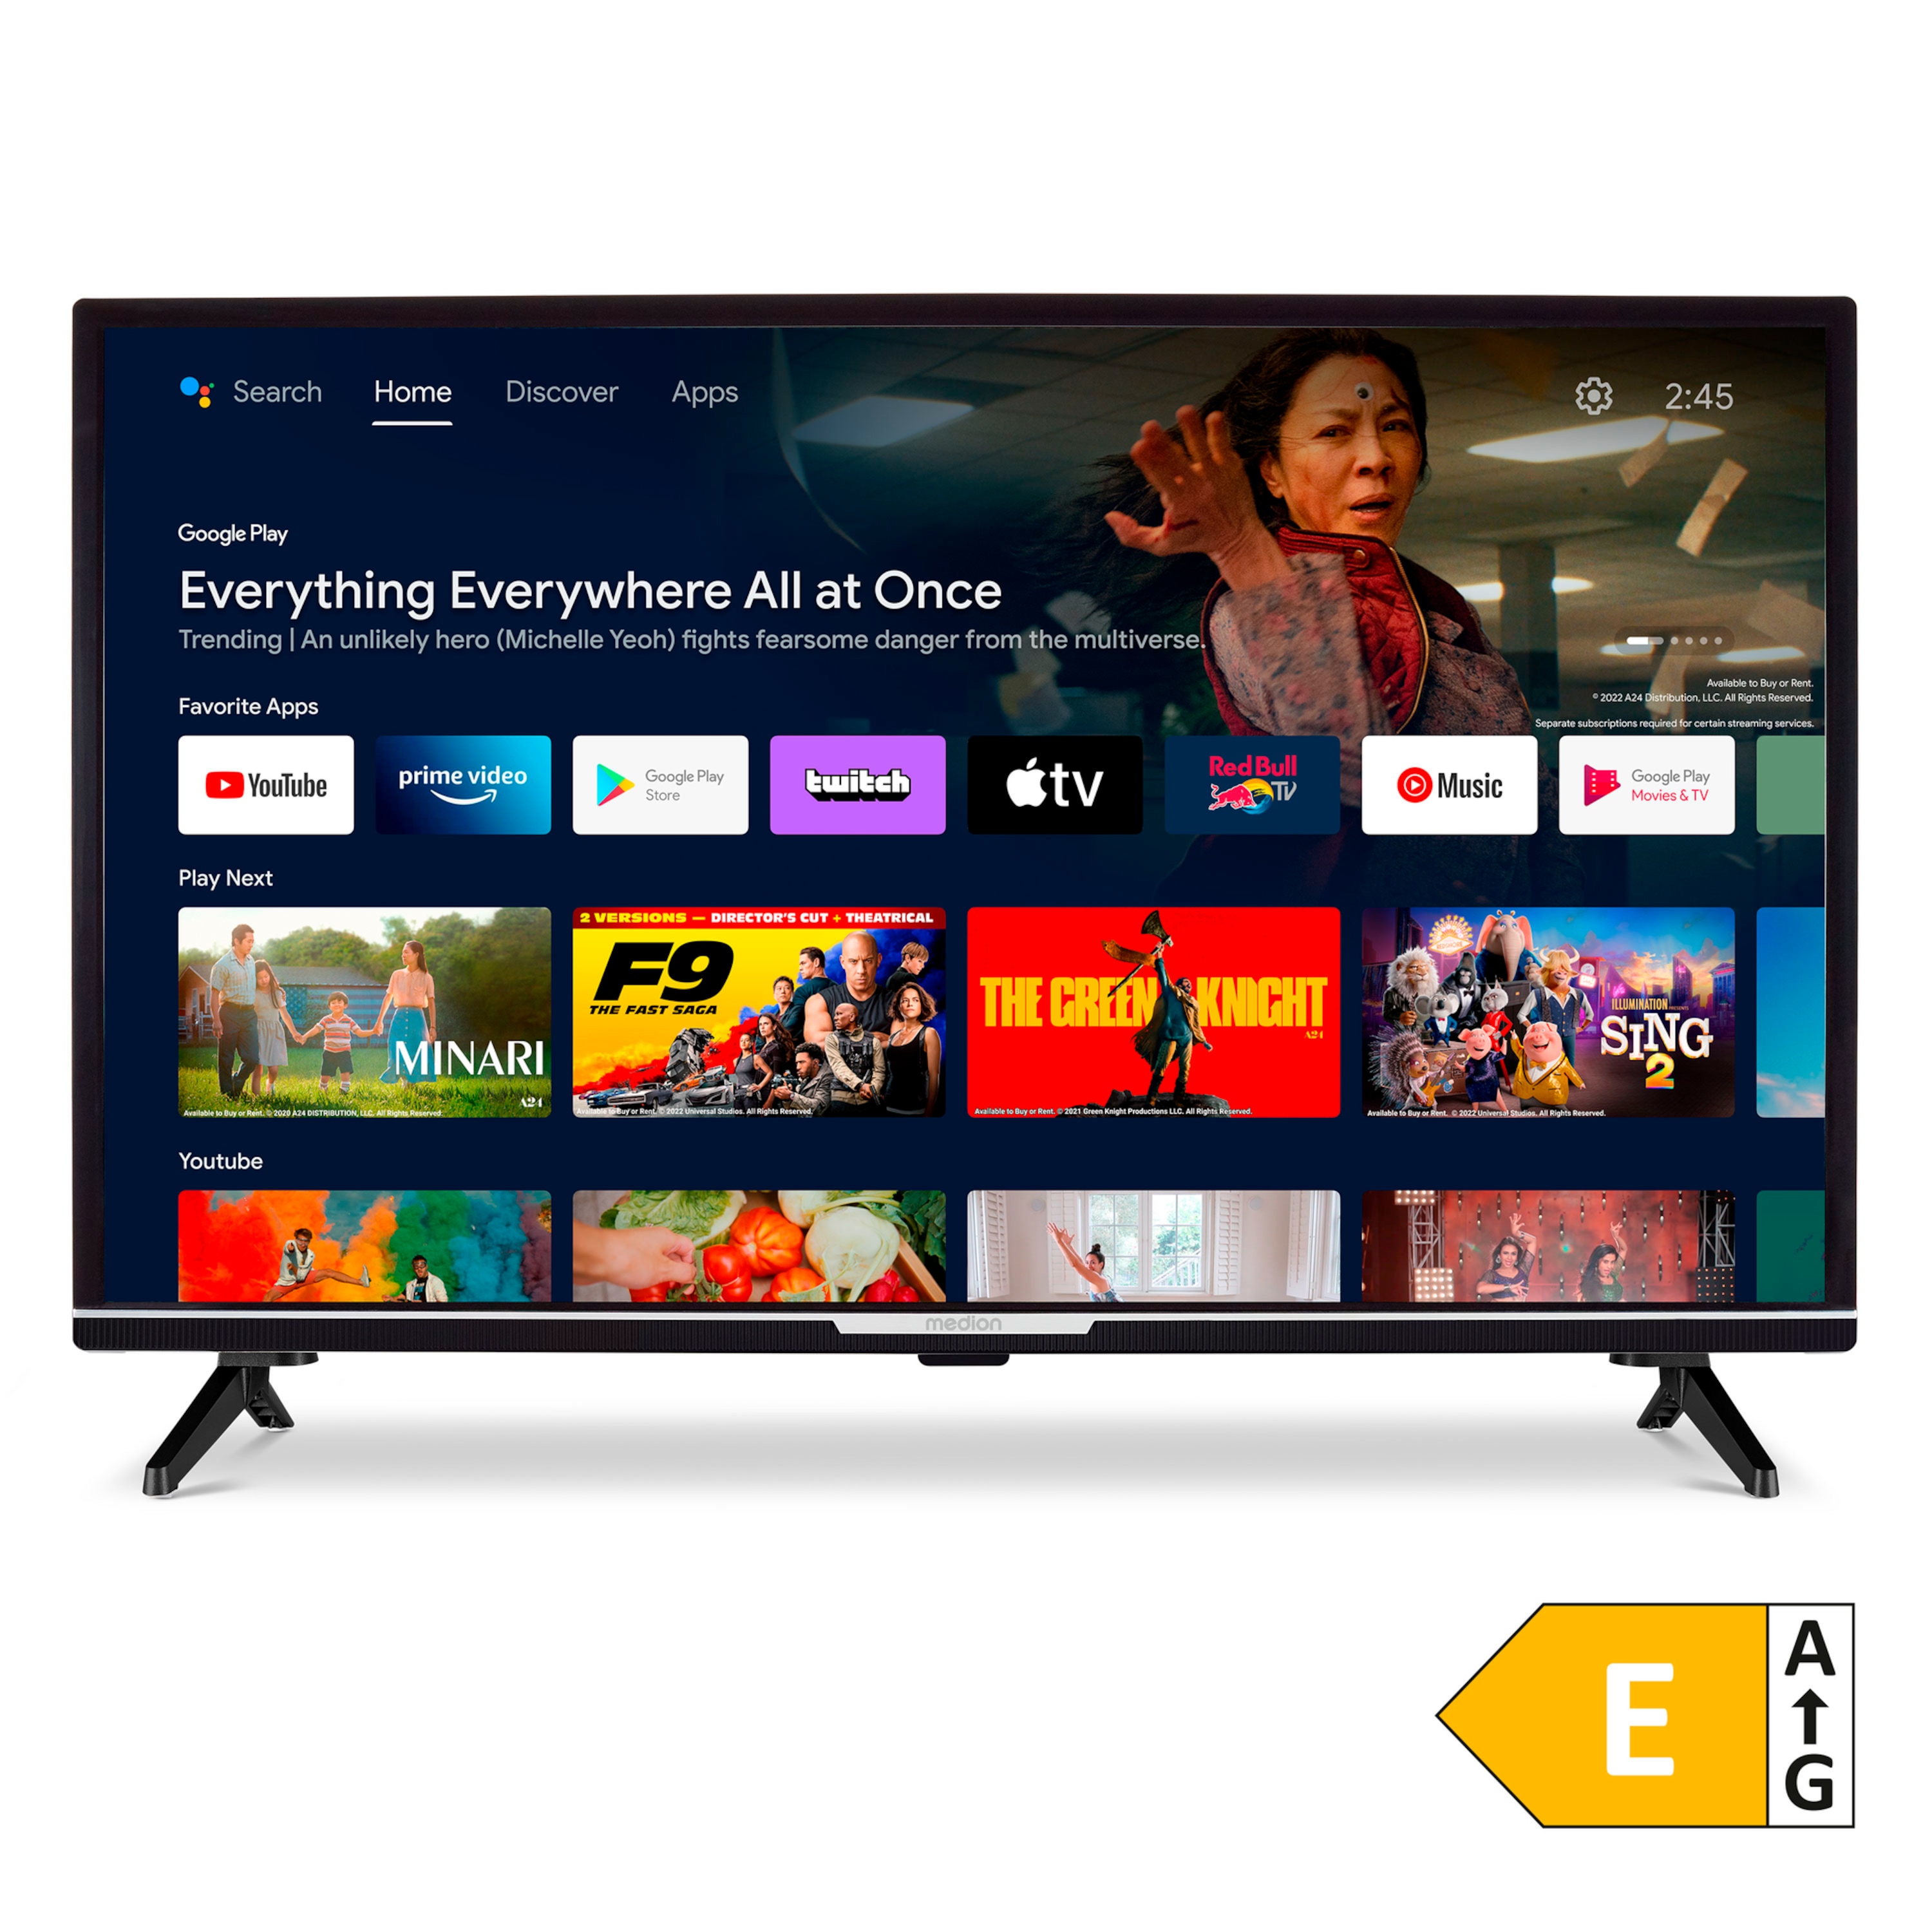 Ready To günstig Kaufen-MEDION LIFE® P13242 (MD 30042) Android TV, 80 cm (32''), Full HD Display, HDR, PVR ready, Bluetooth®, Netflix, Amazon Prime Video. MEDION LIFE® P13242 (MD 30042) Android TV, 80 cm (32''), Full HD Display, HDR, PVR ready, Bluetooth®, Ne